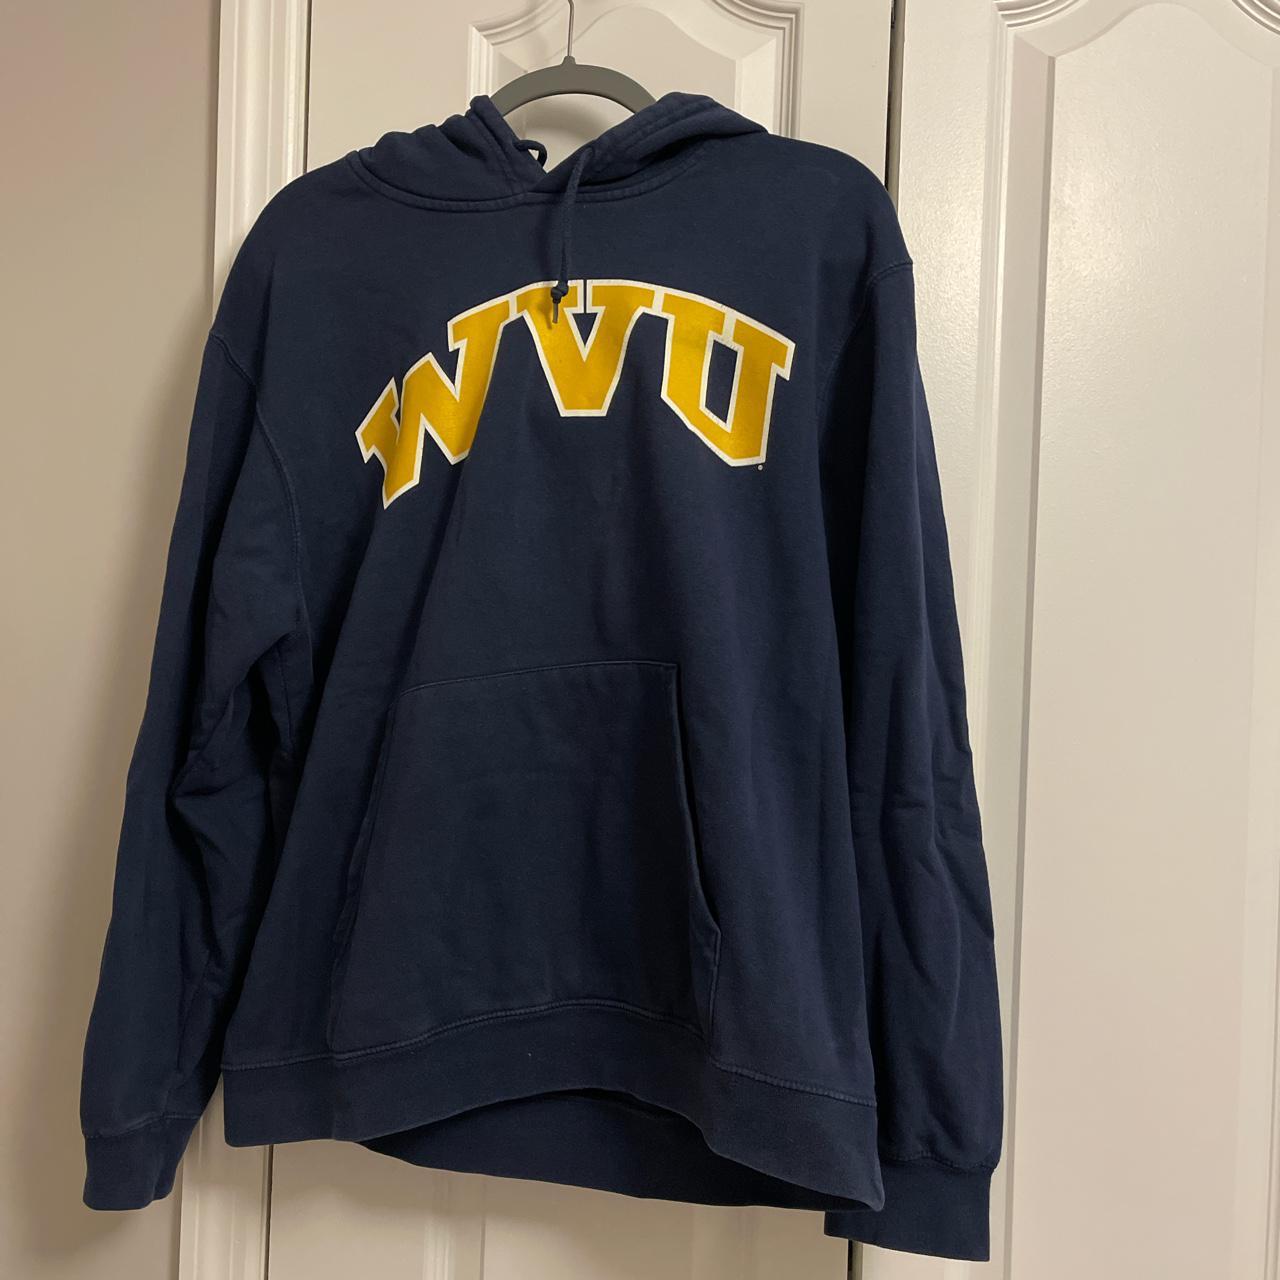 Guess Women's Navy and Yellow Hoodie